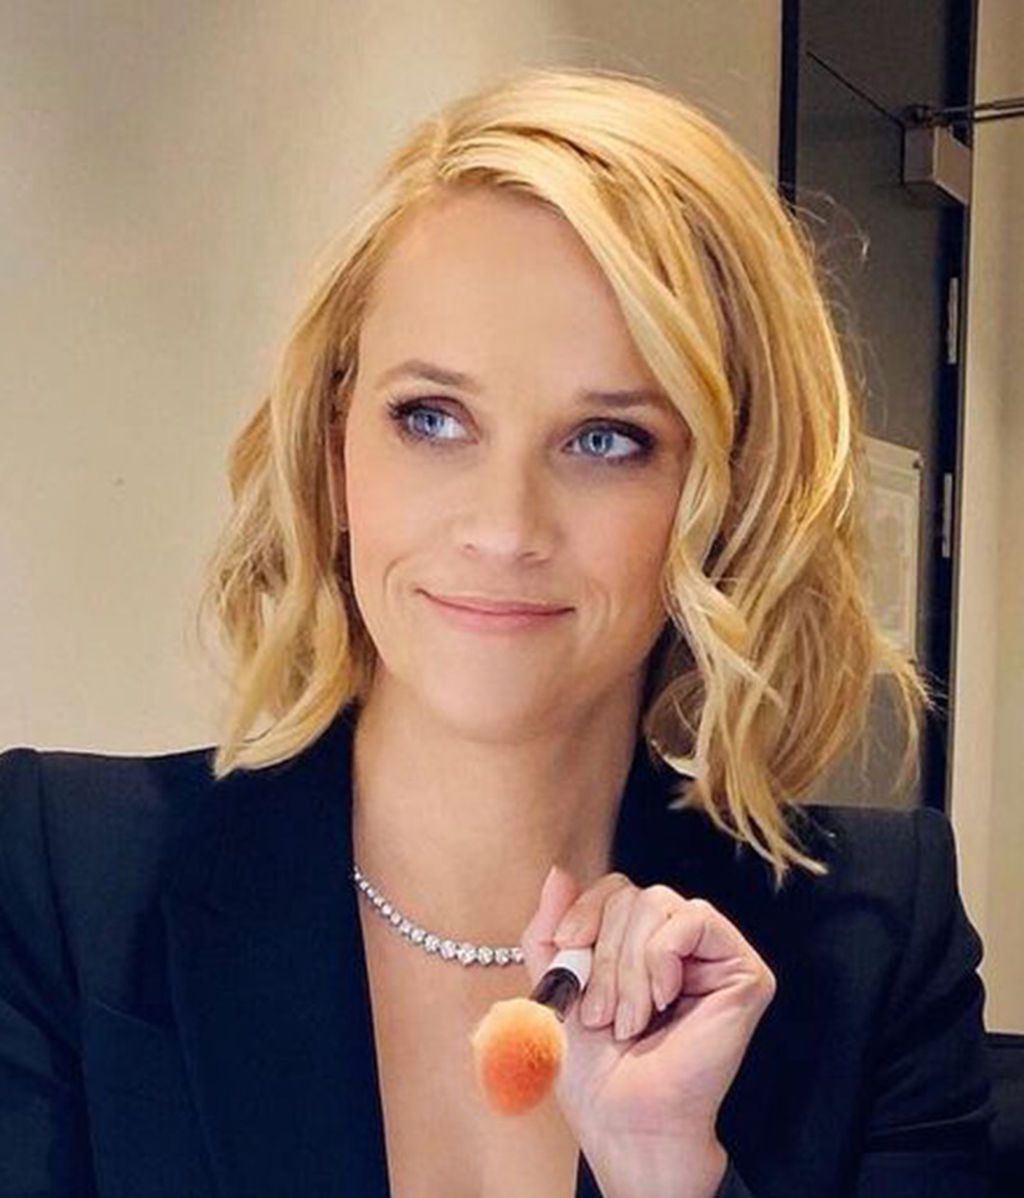 @reesewitherspoon